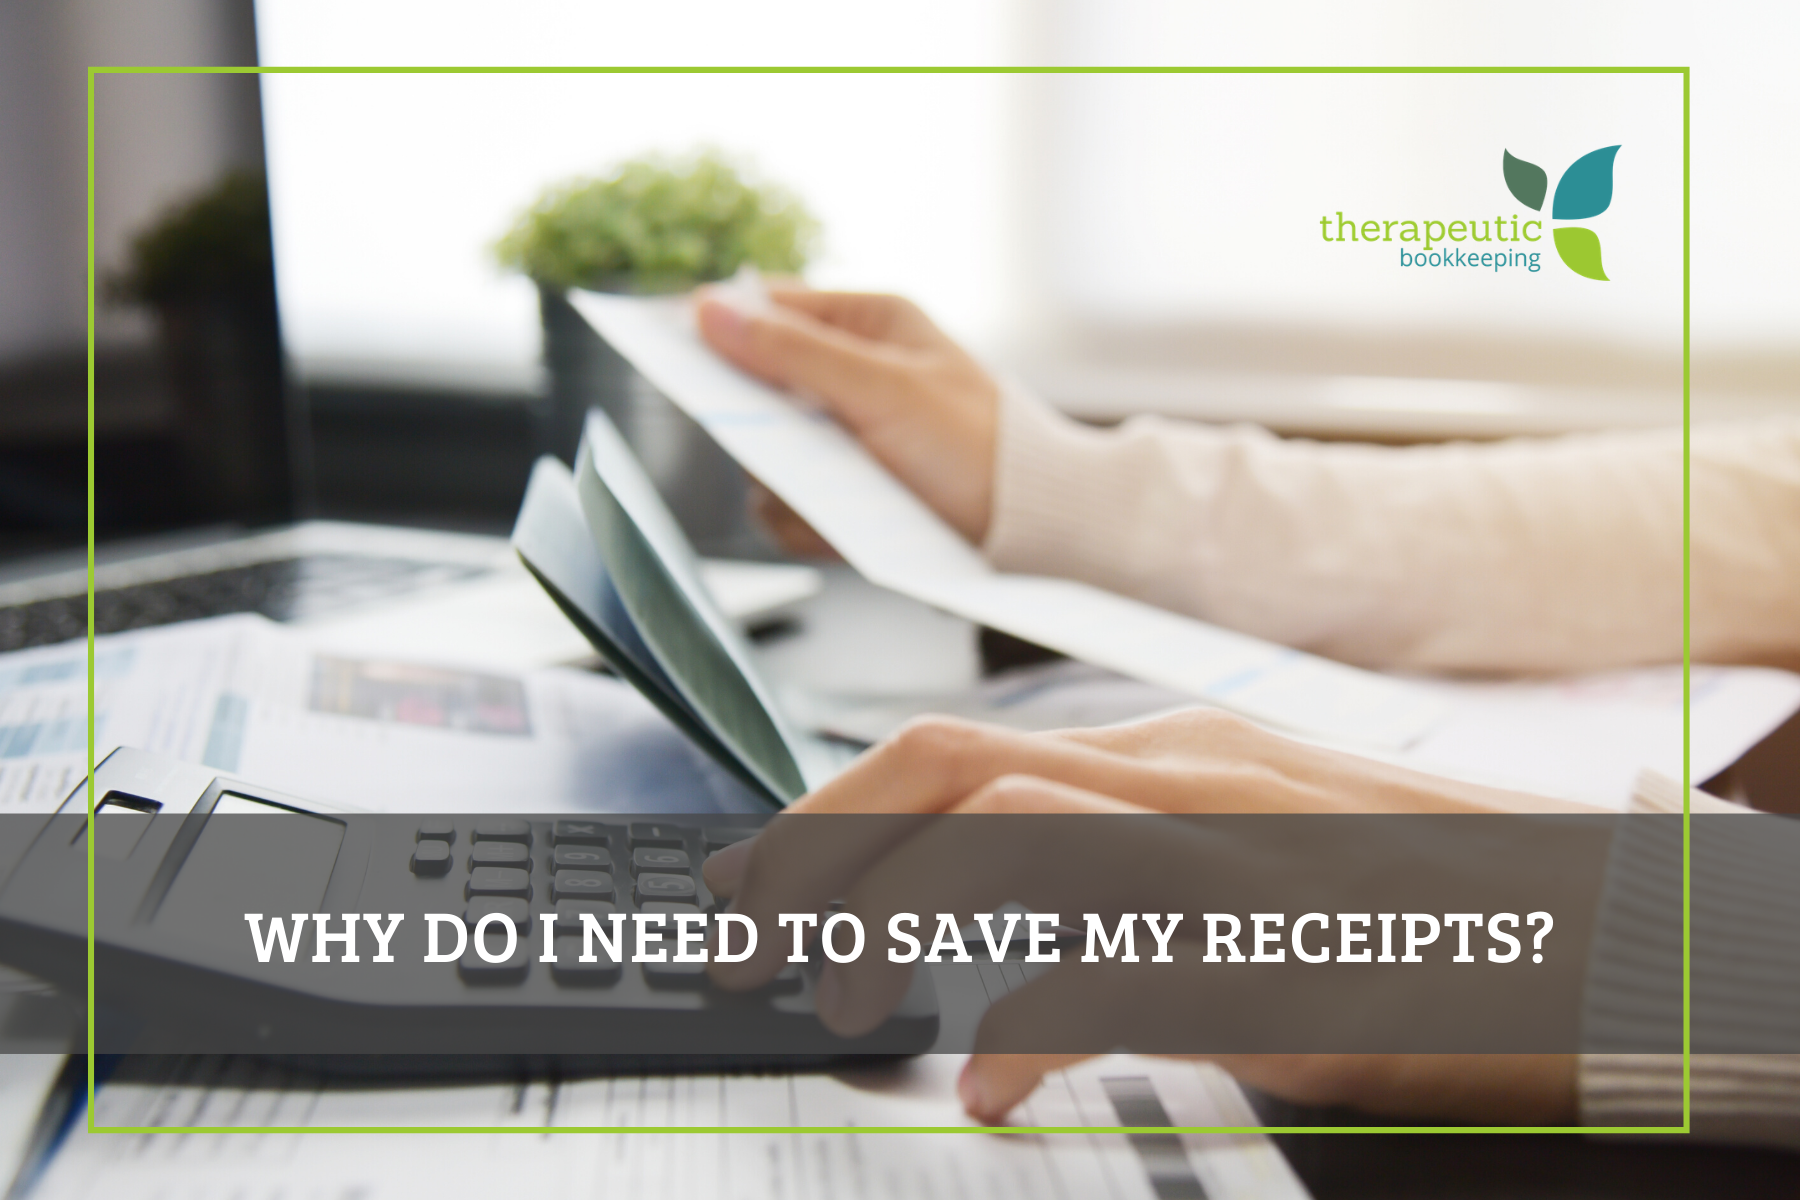 Why do I need to save my receipts?